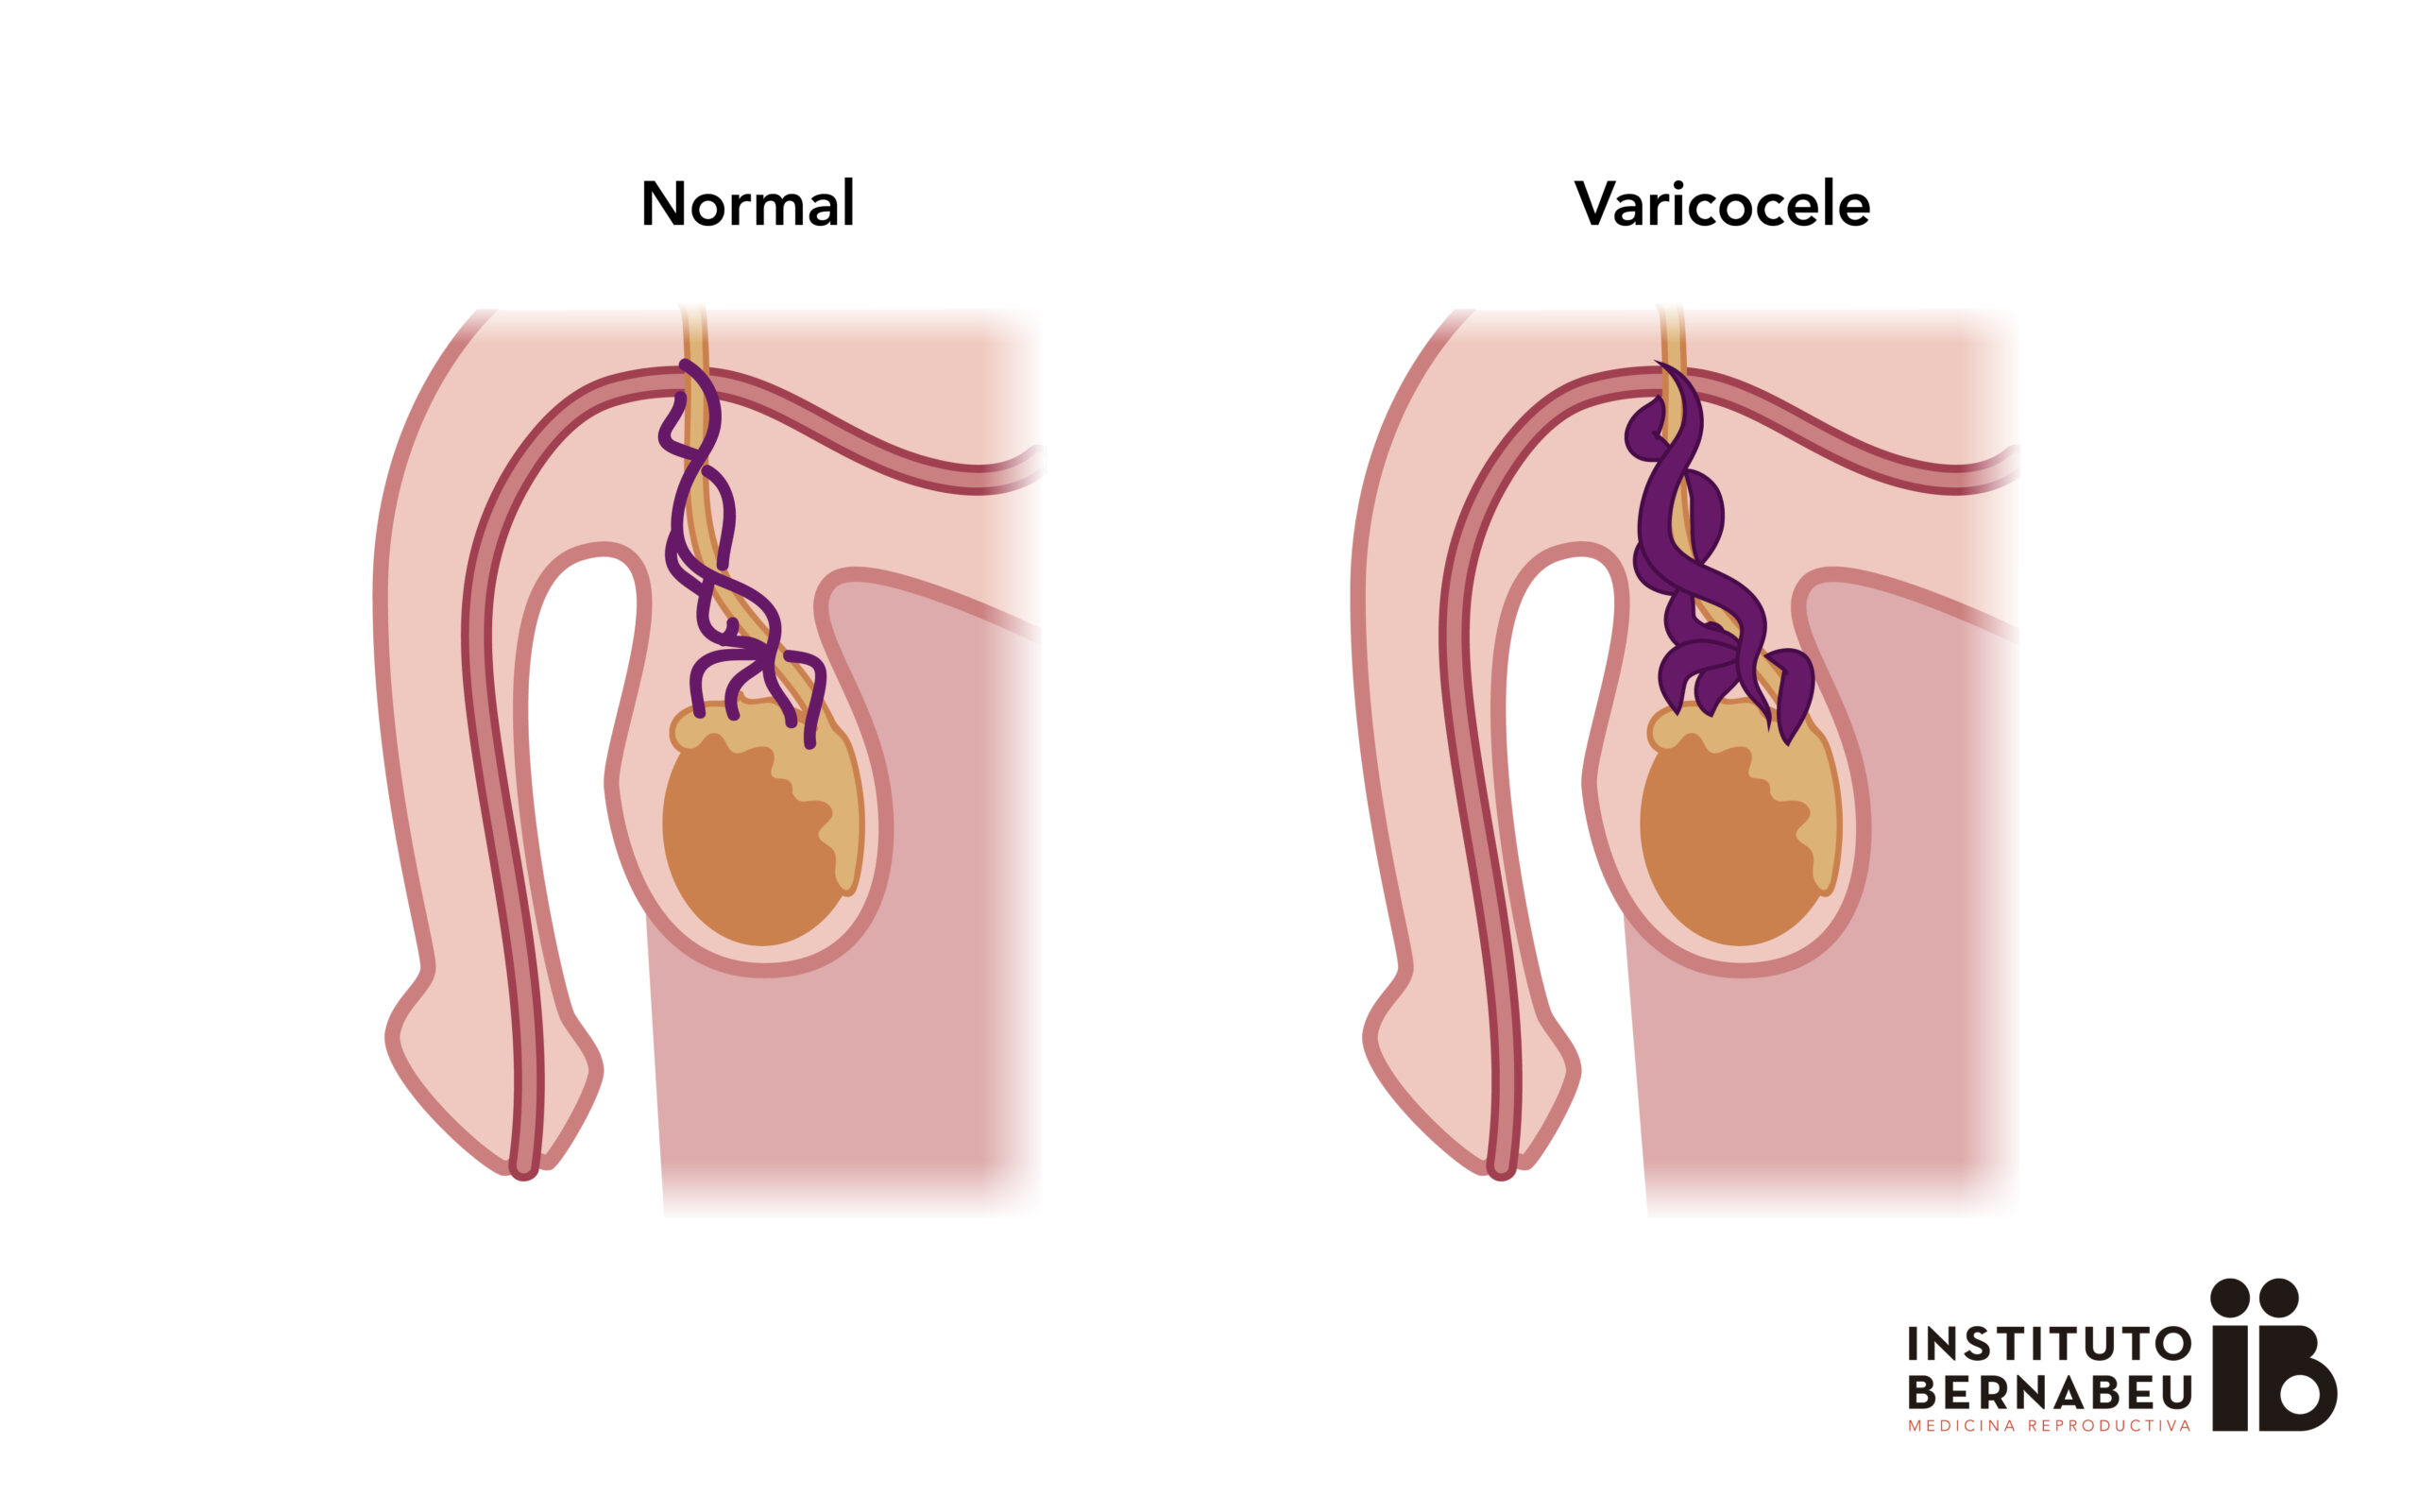 What Are The Risk Factors of Varicocele?